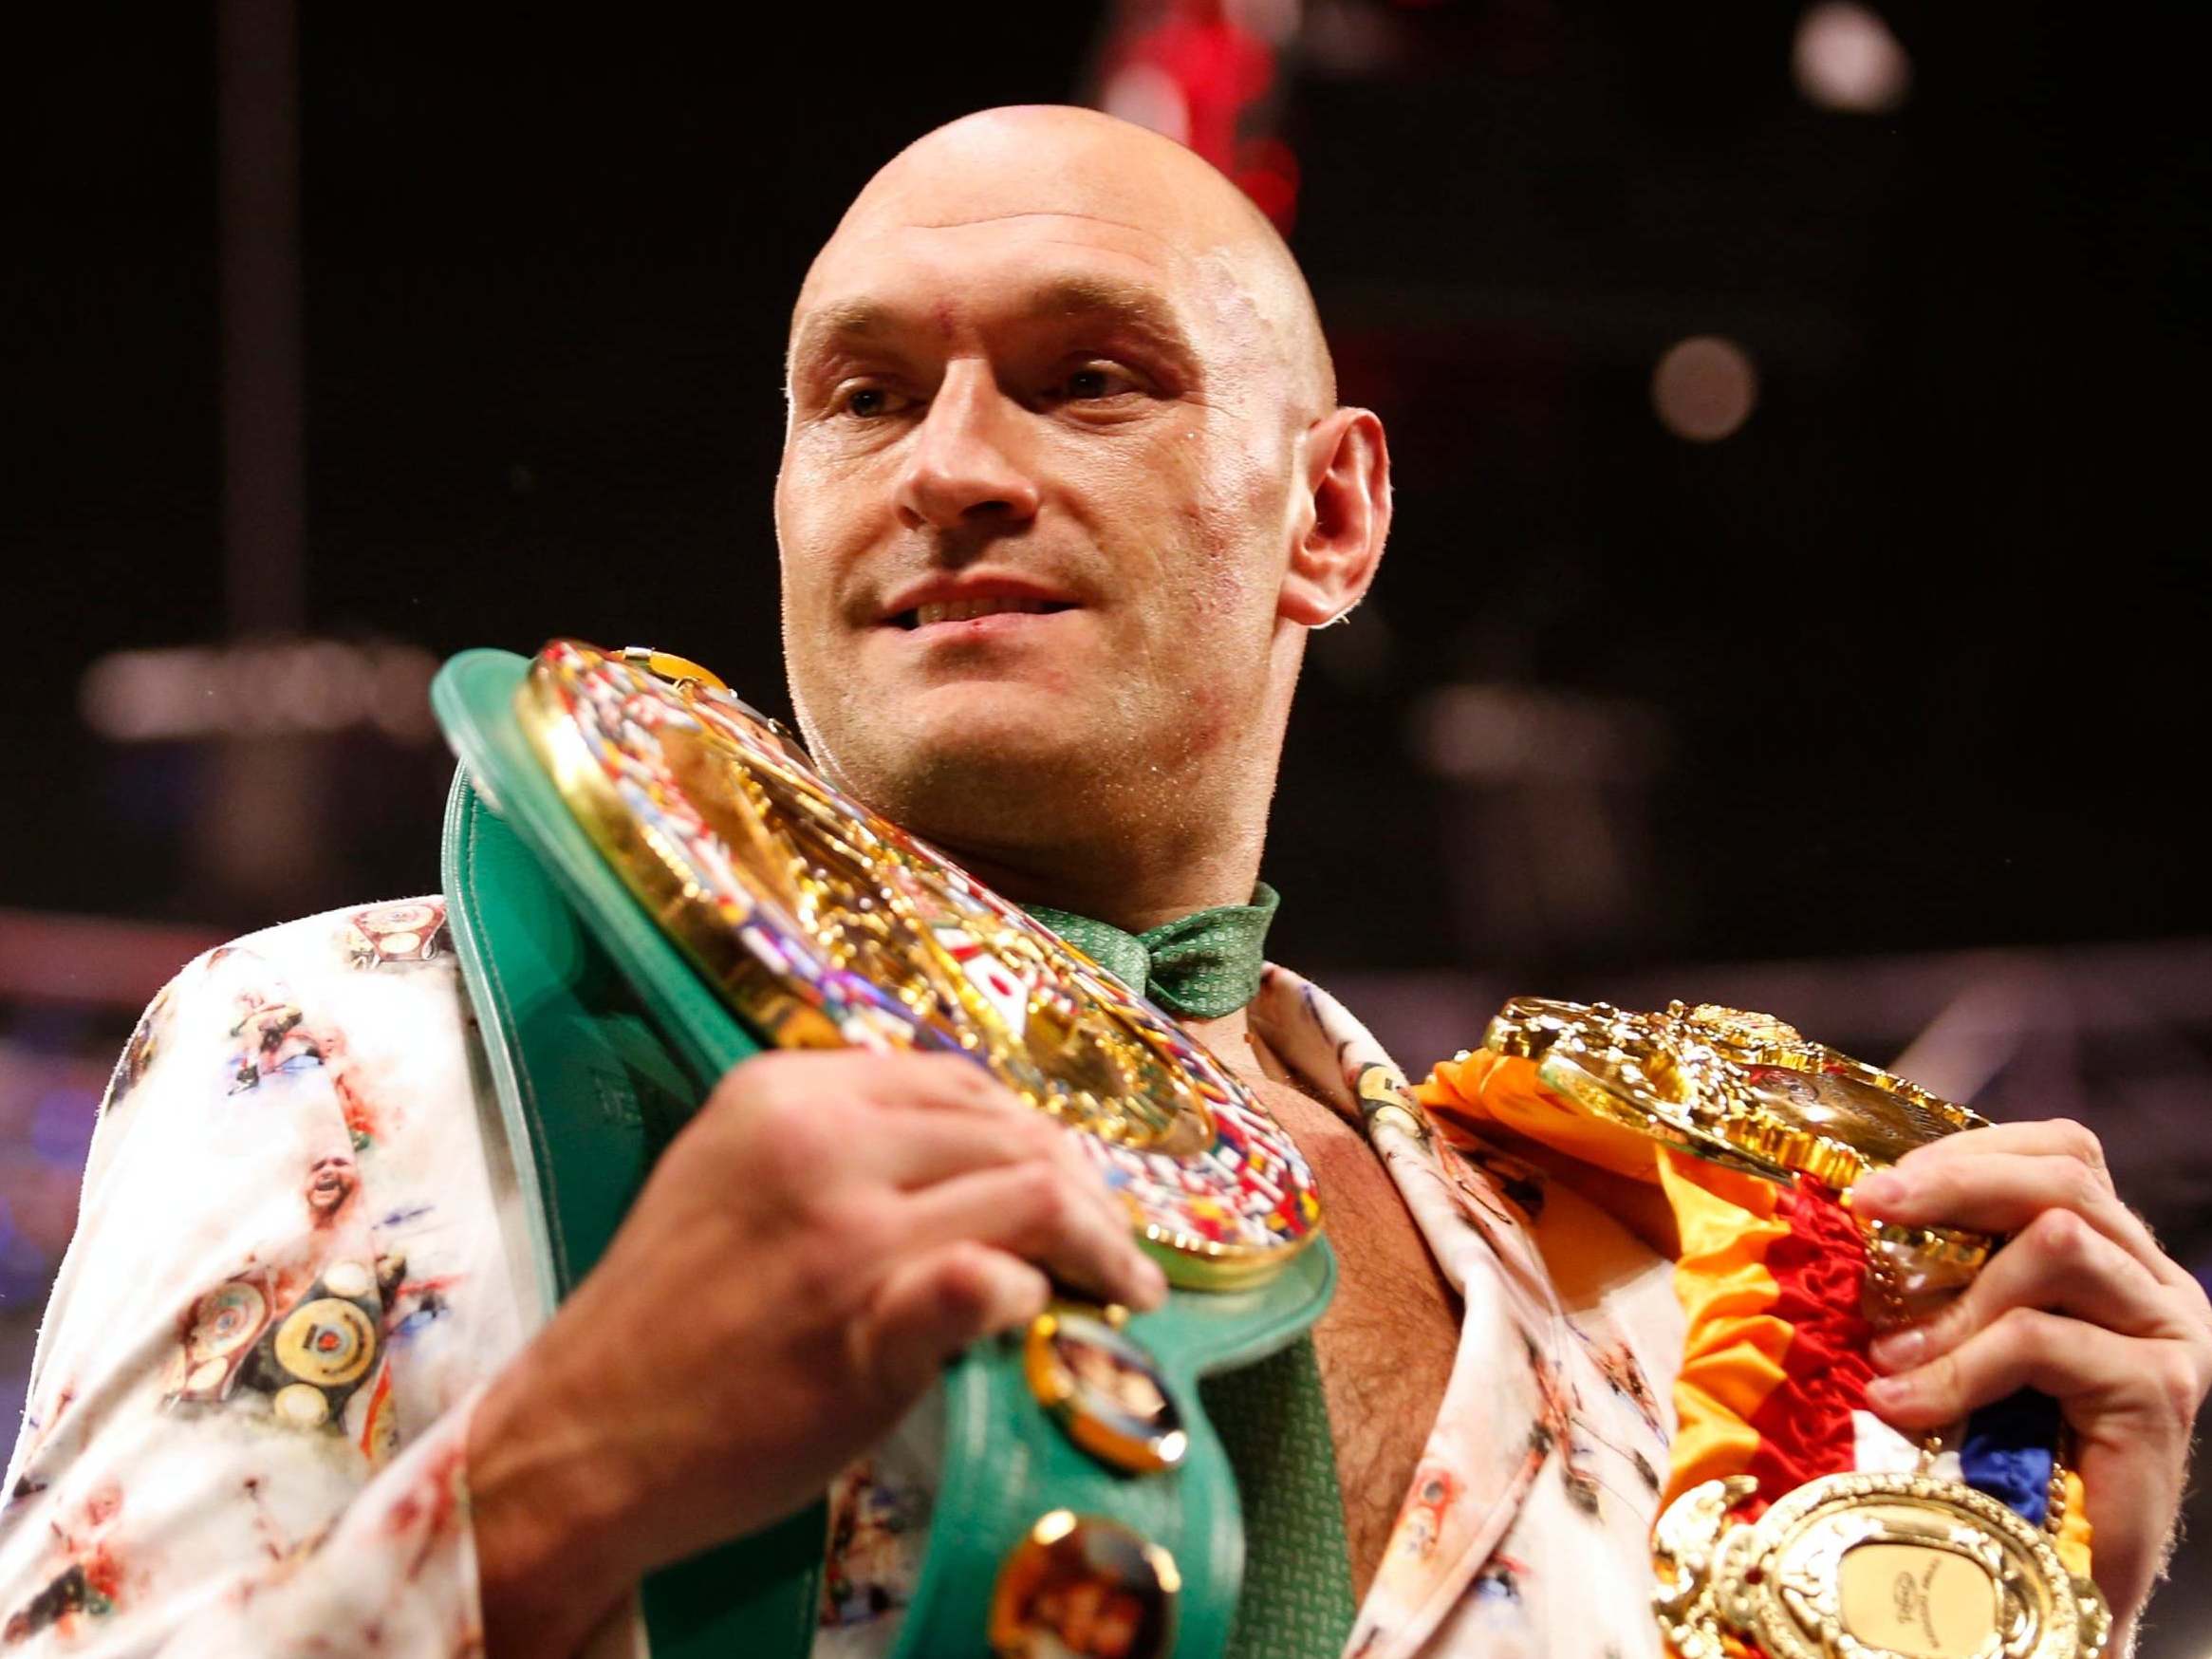 Tyson Fury admits he will be a different person after the coronavirus crisis